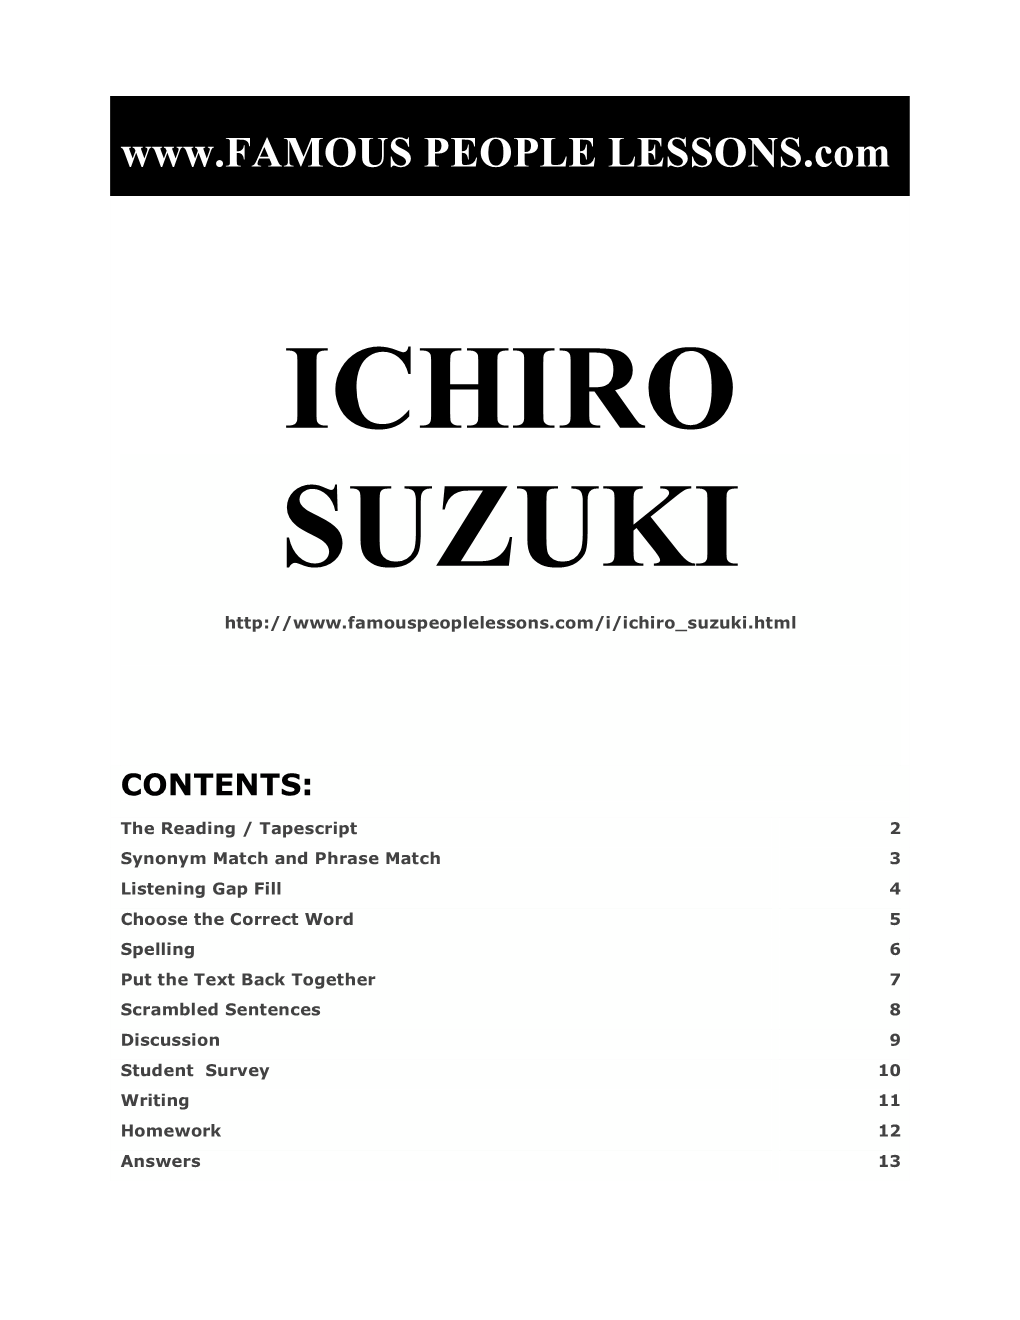 ICHIRO SUZUKI DISCUSSION: STUDENT A’S QUESTIONS (Do Not Show These to Student B)